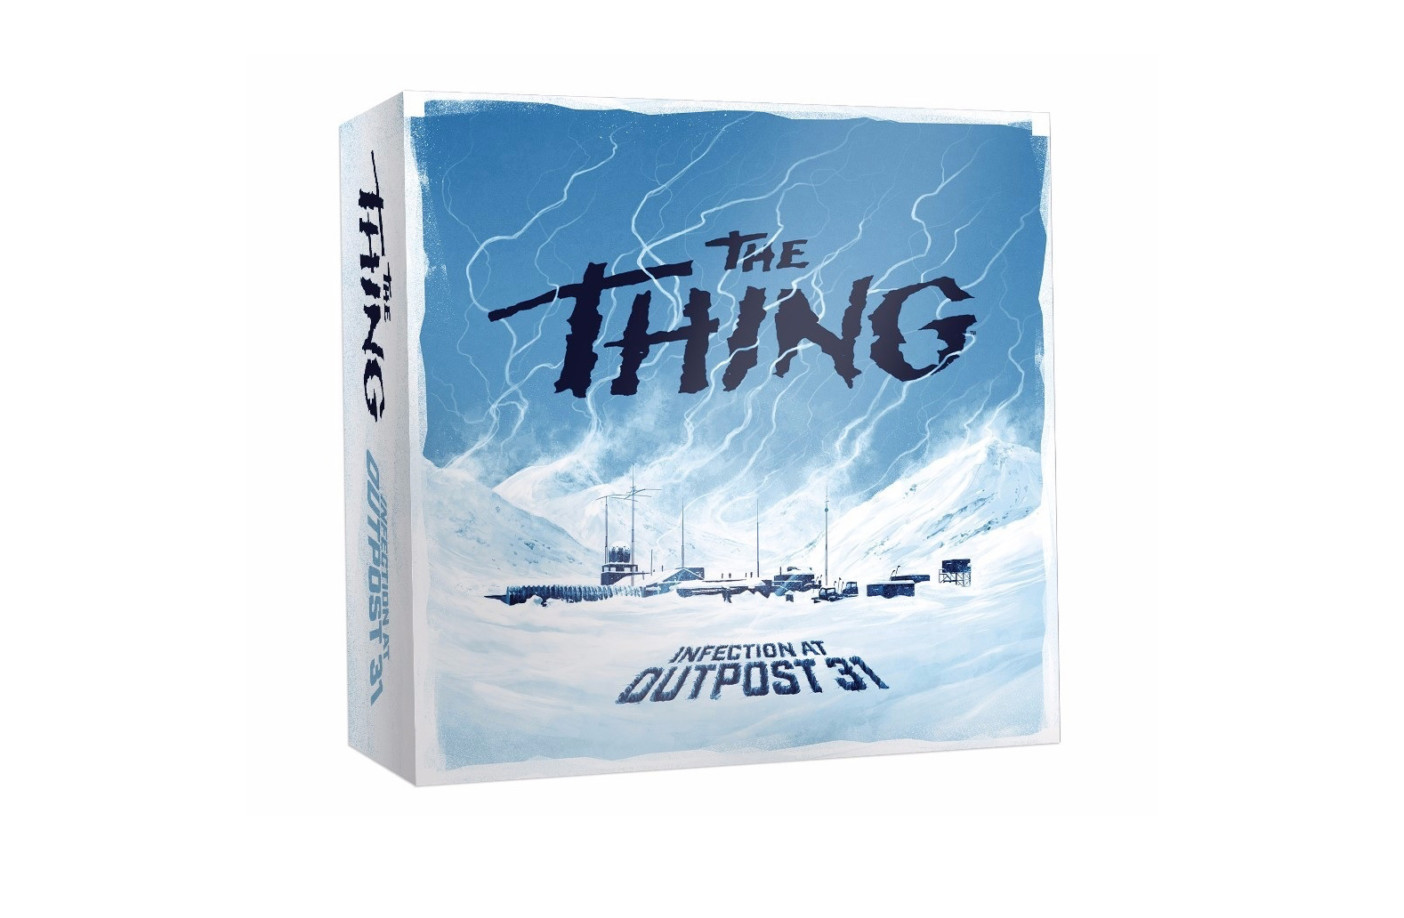 The 1 thing book. The thing boardgame.